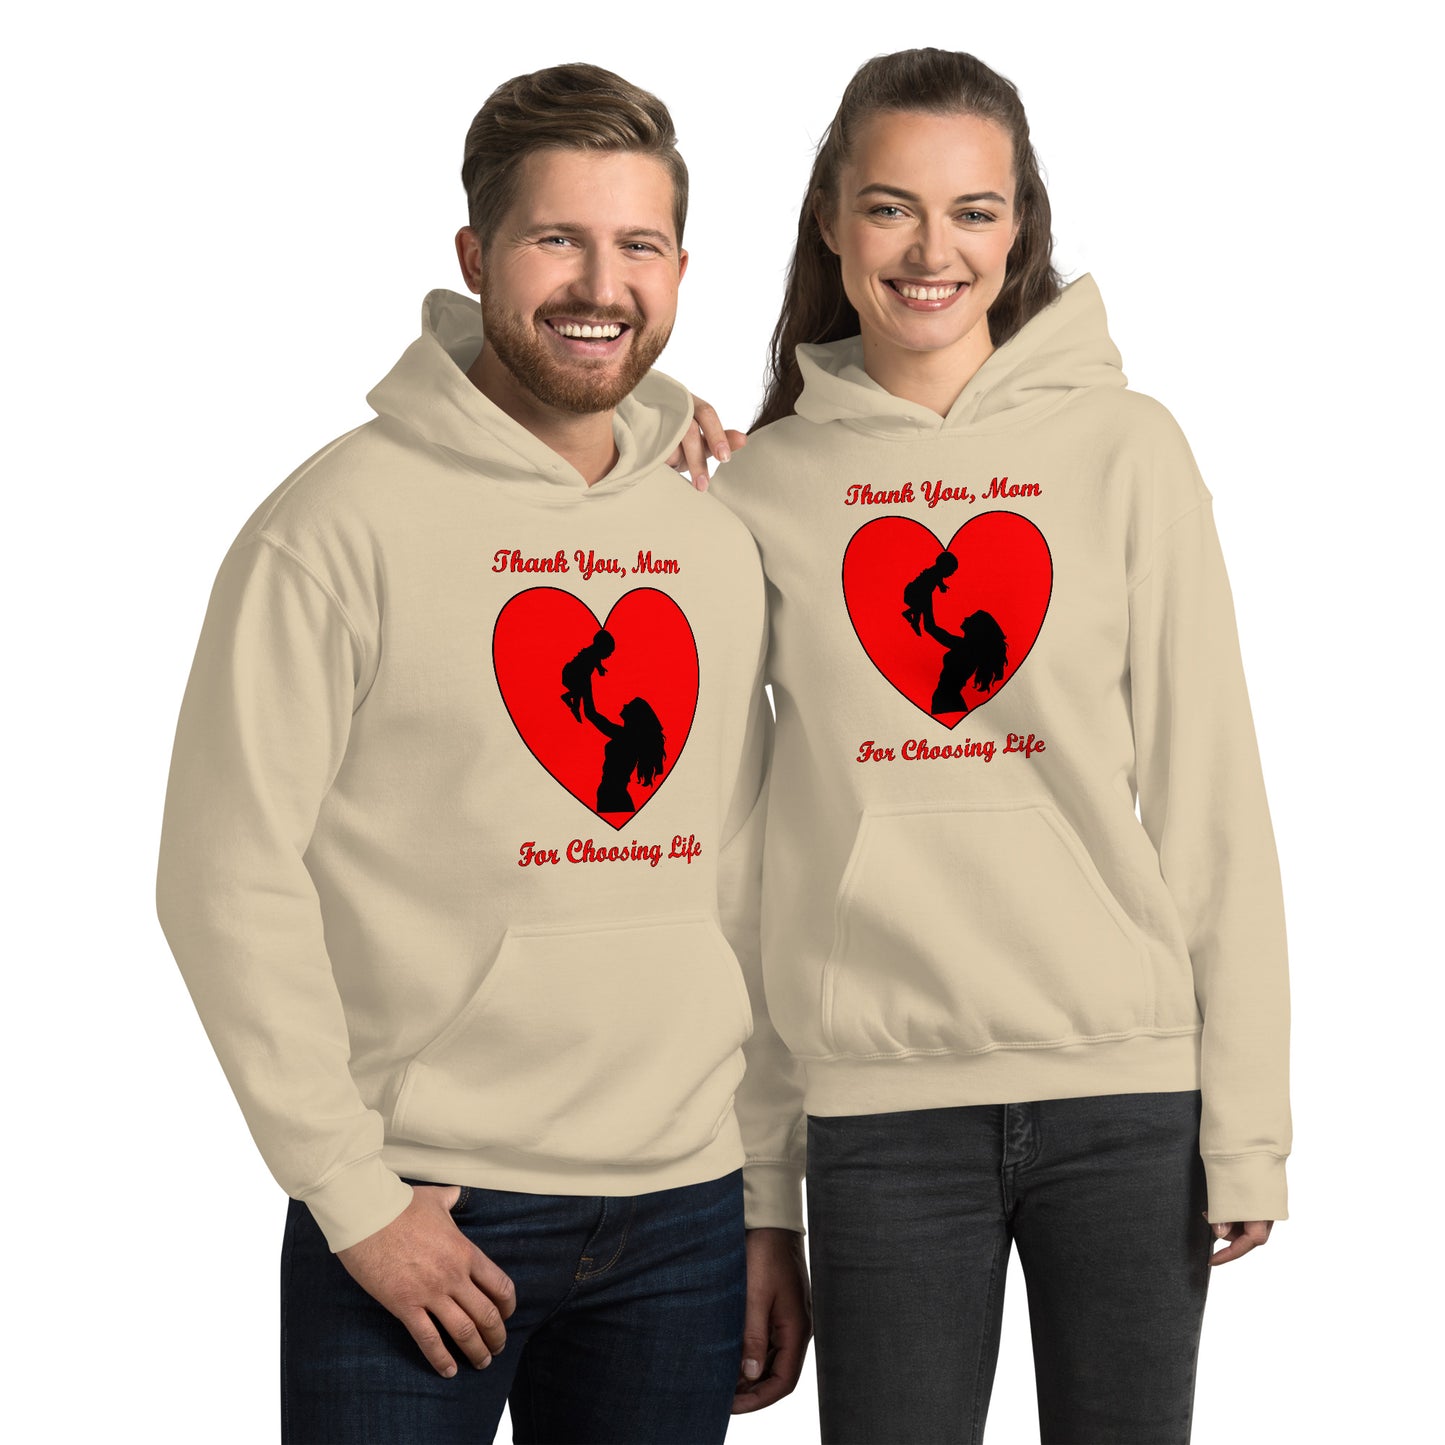 A002 Hoodie – Gildan 18500 Unisex Hoodie Featuring Mother and Baby Graphic with text “Thank You, Mom For Choosing Life.”